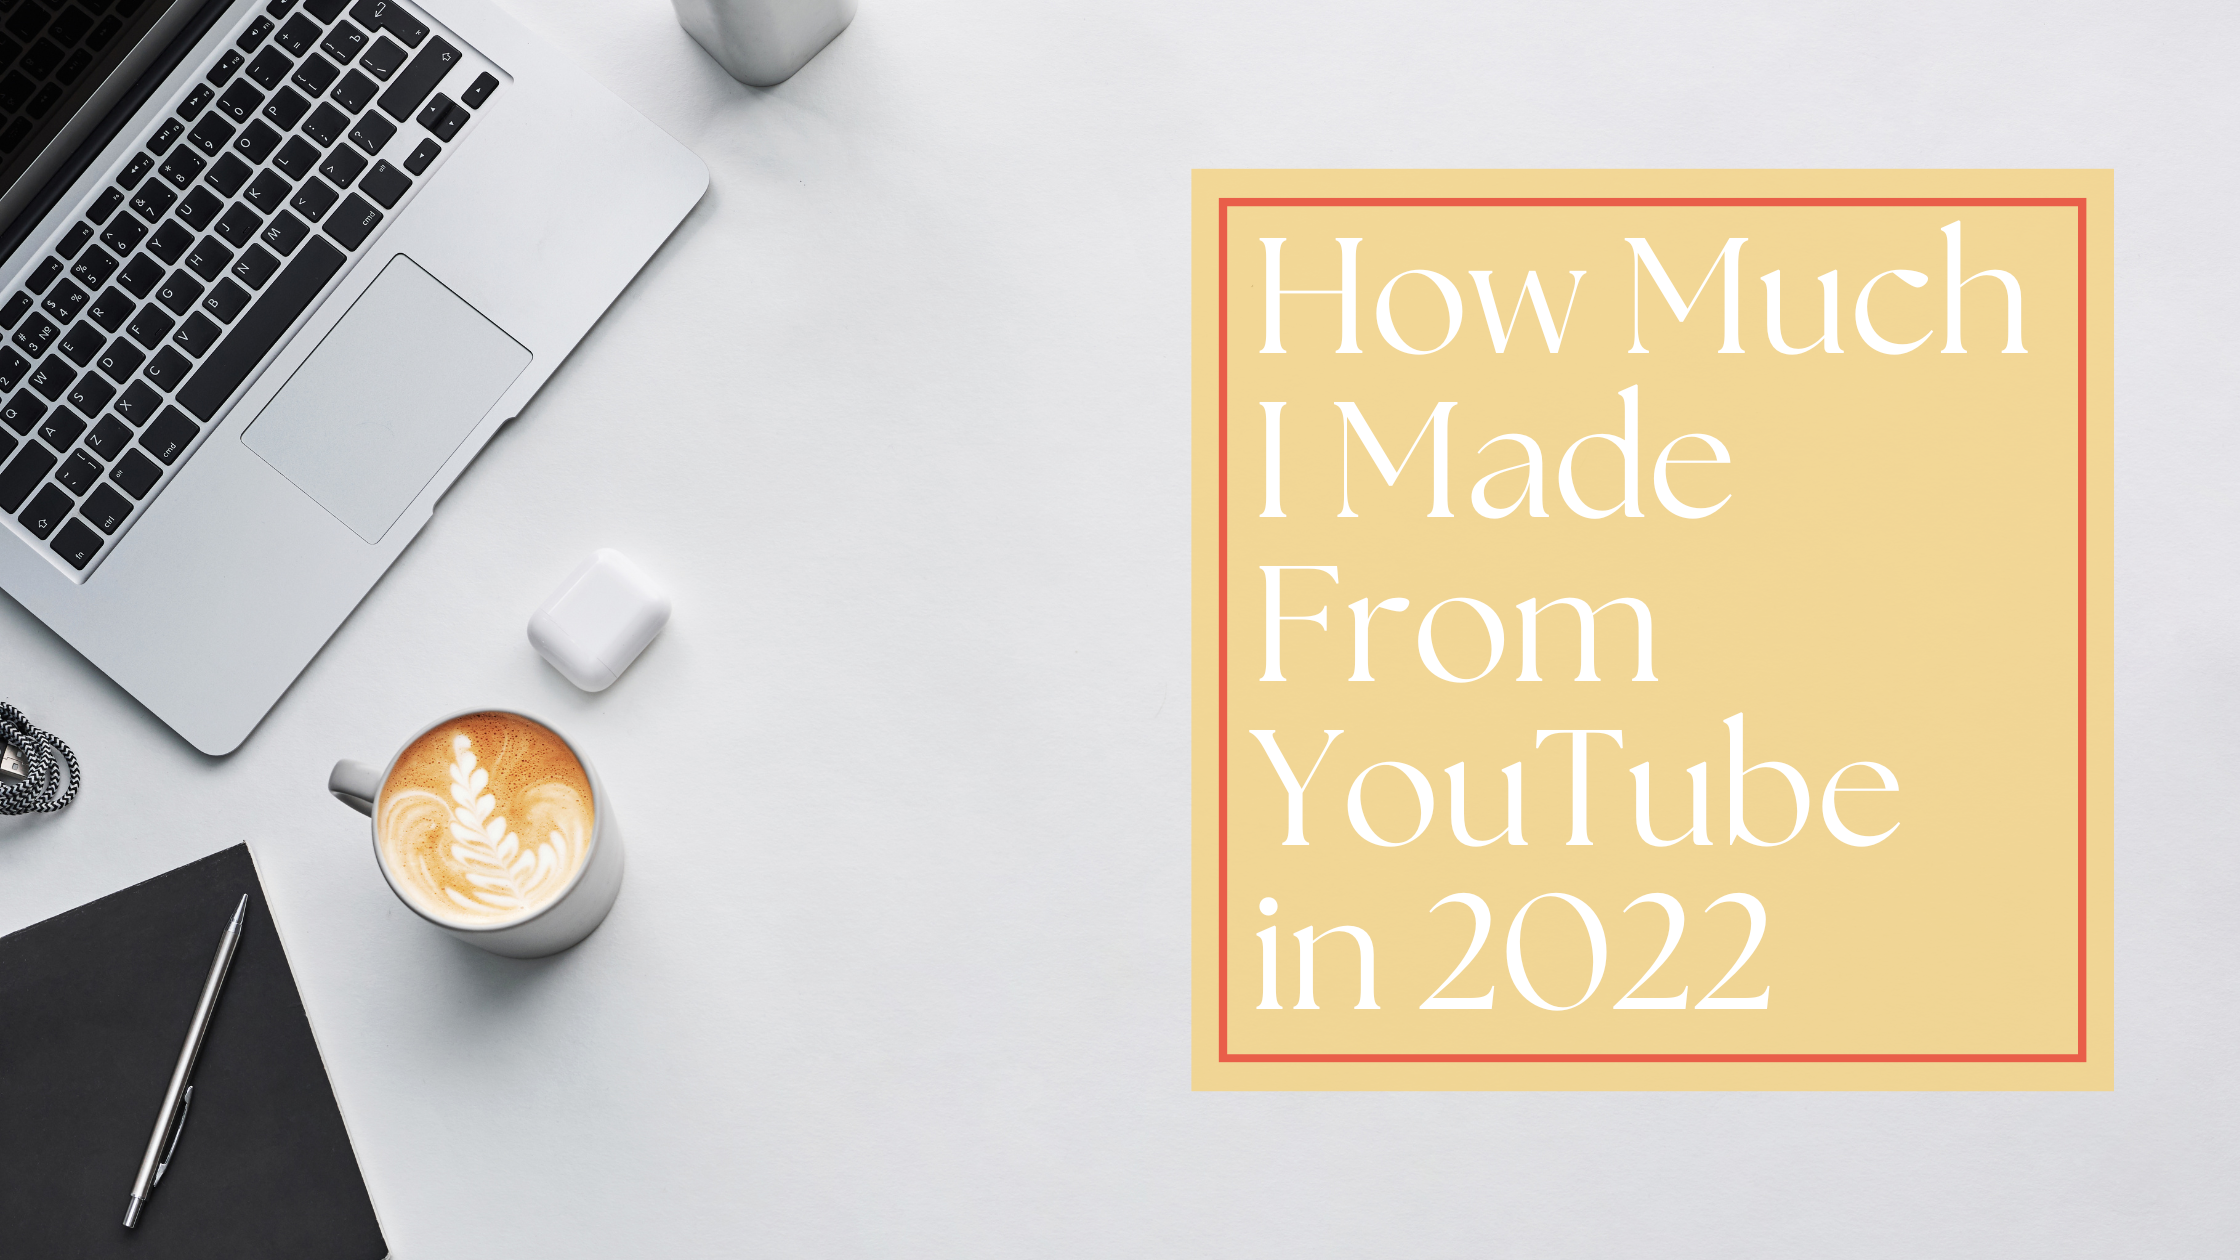 How Much I Made From YouTube in 2022